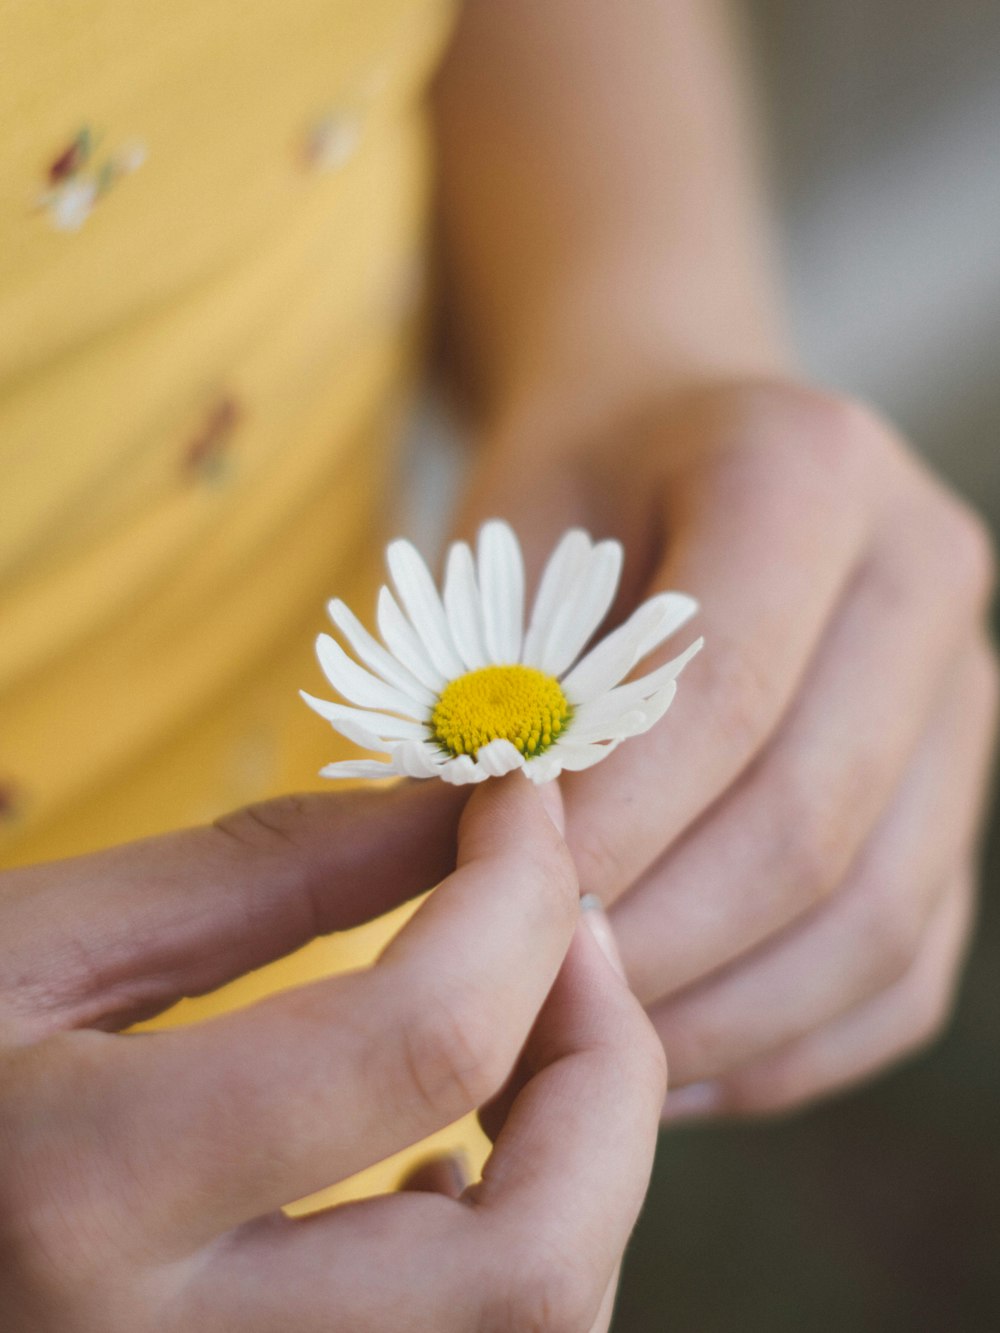 person holding white daisy flower